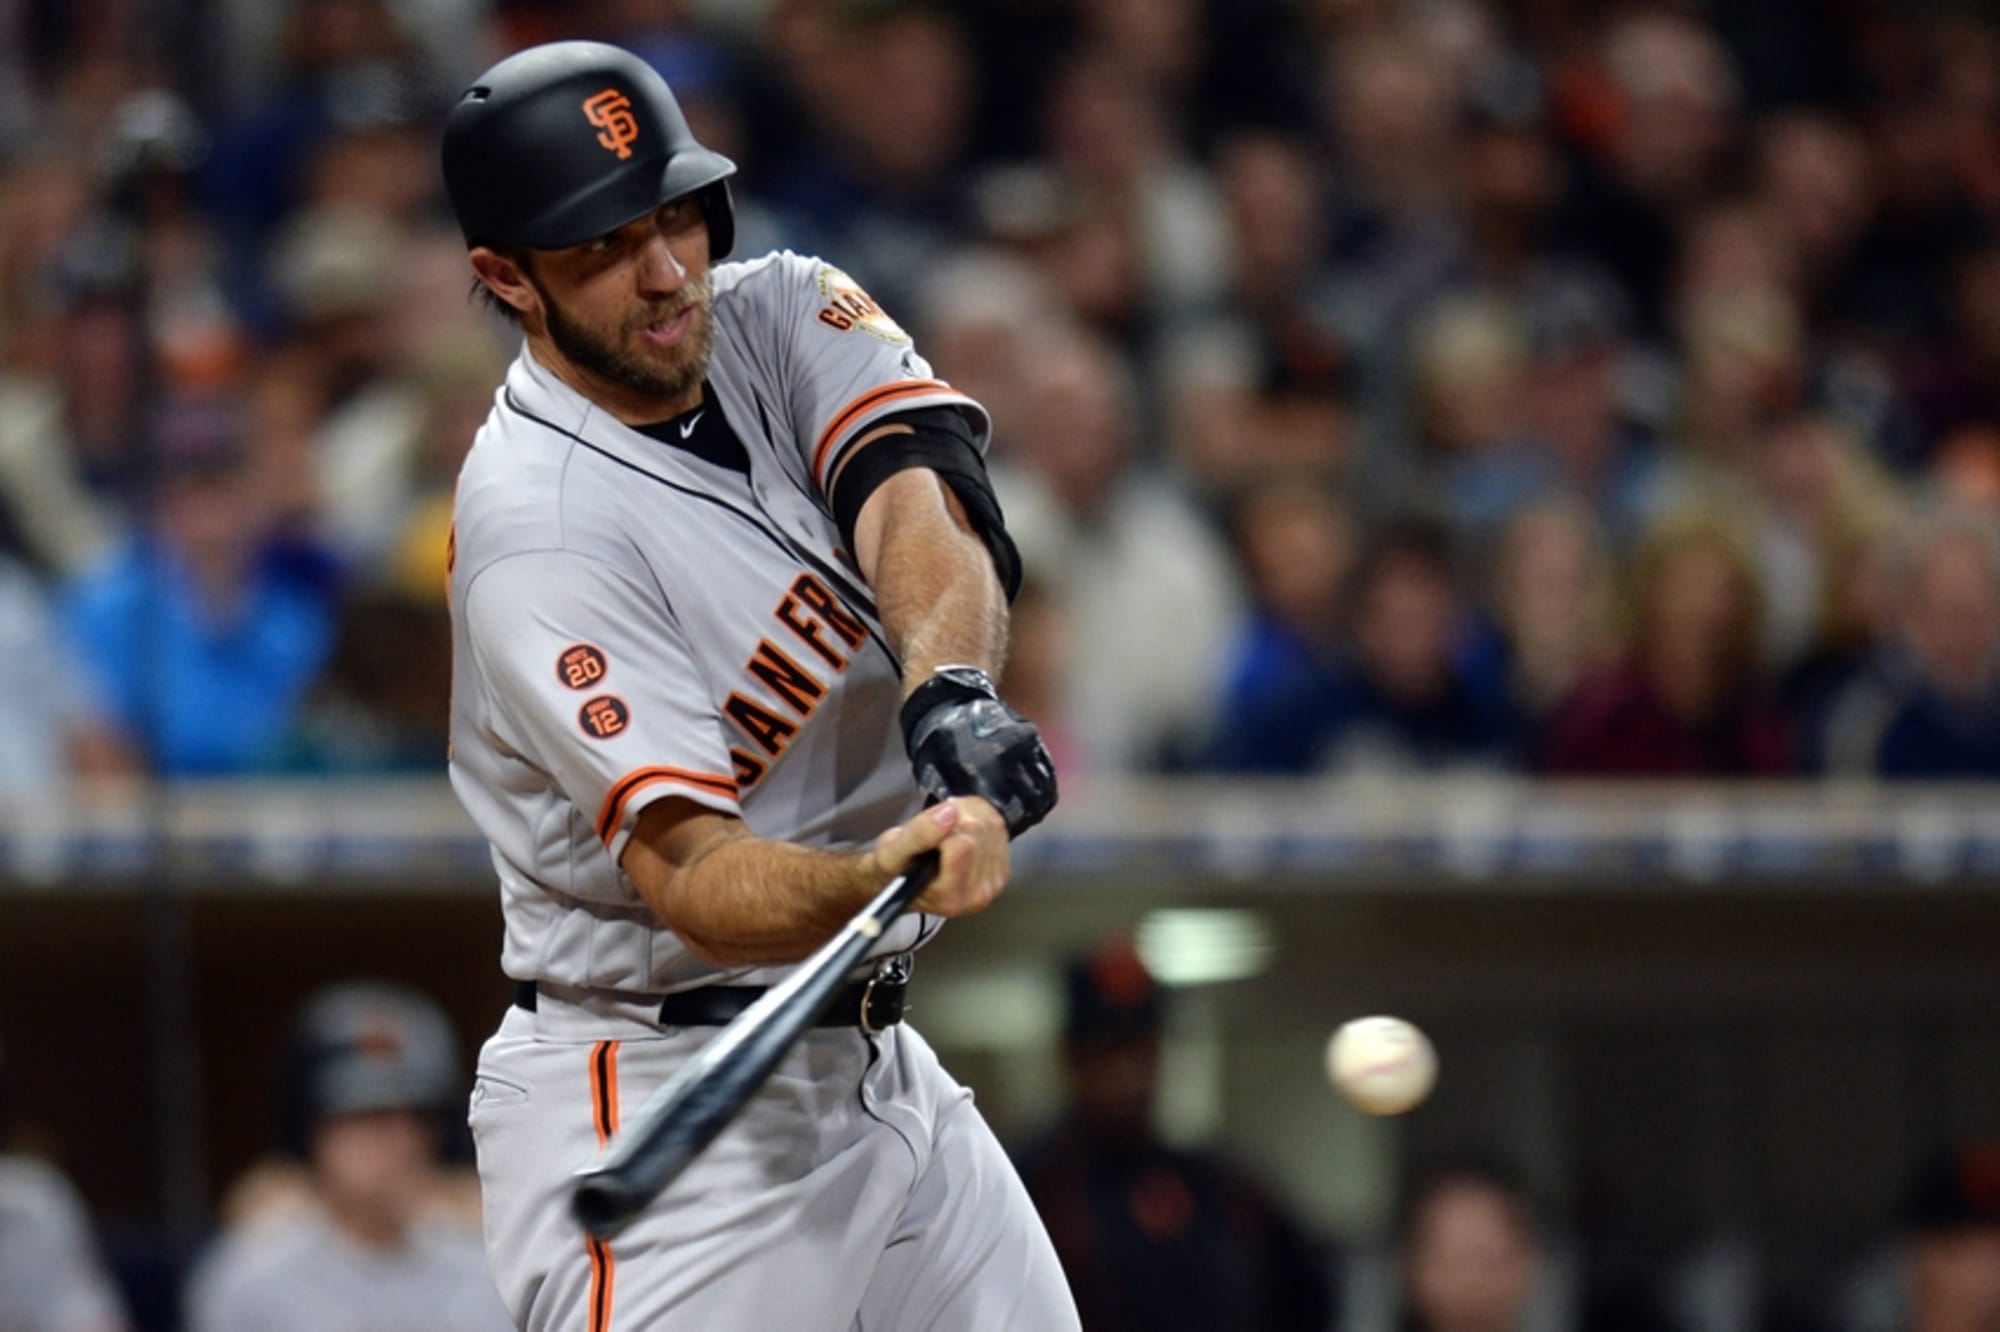 San Francisco Giants: Madison Bumgarner's Home Run Derby Candidacy